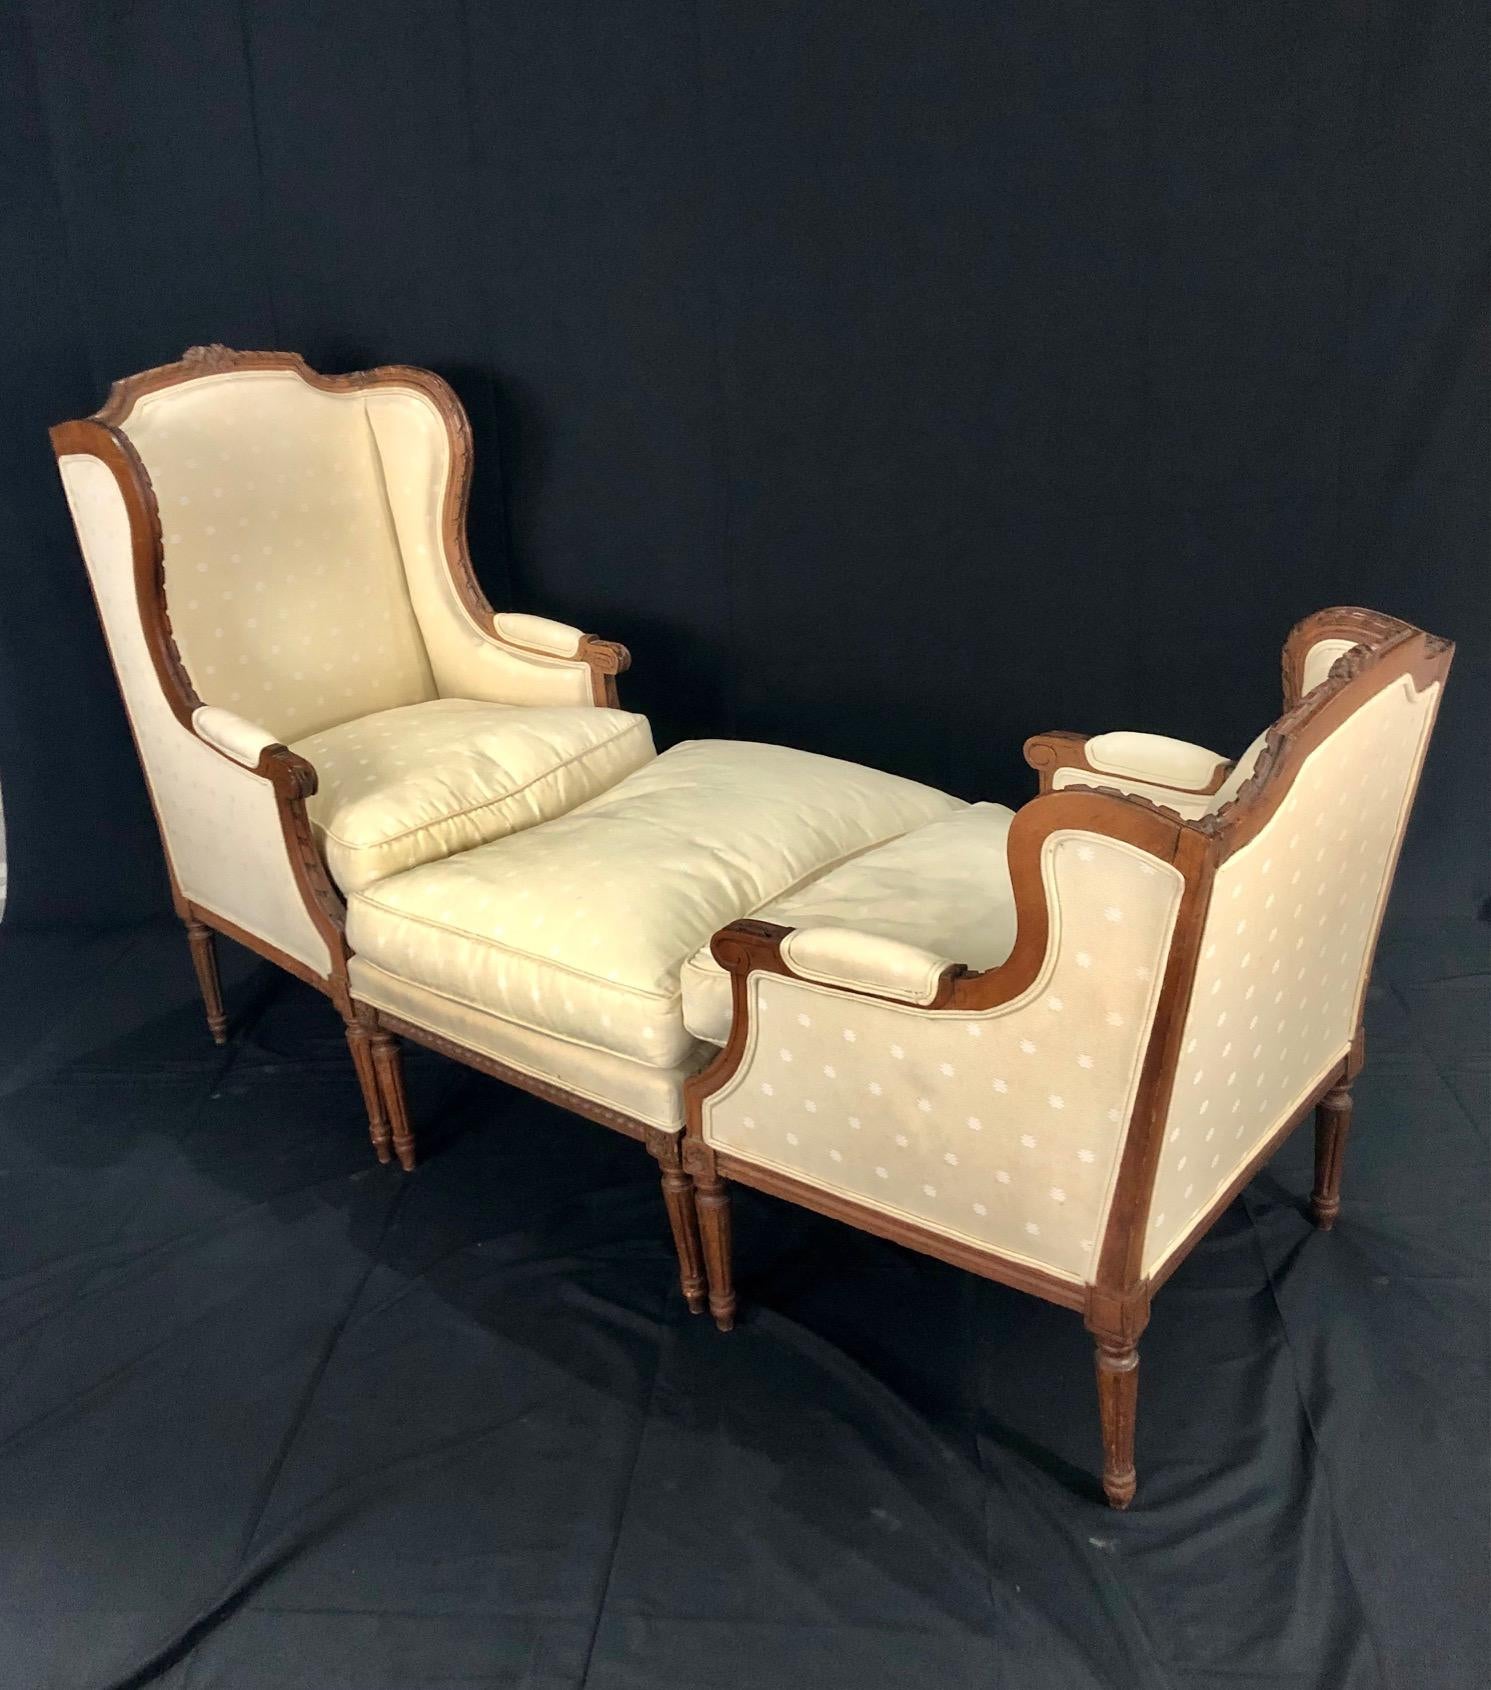 A French Louis XVI style walnut Duchesse Brisée with two bergère chairs and their ottoman from the late 19th century and newer upholstery. This French chaise lounge set features three sections consisting of two bergères of slightly different